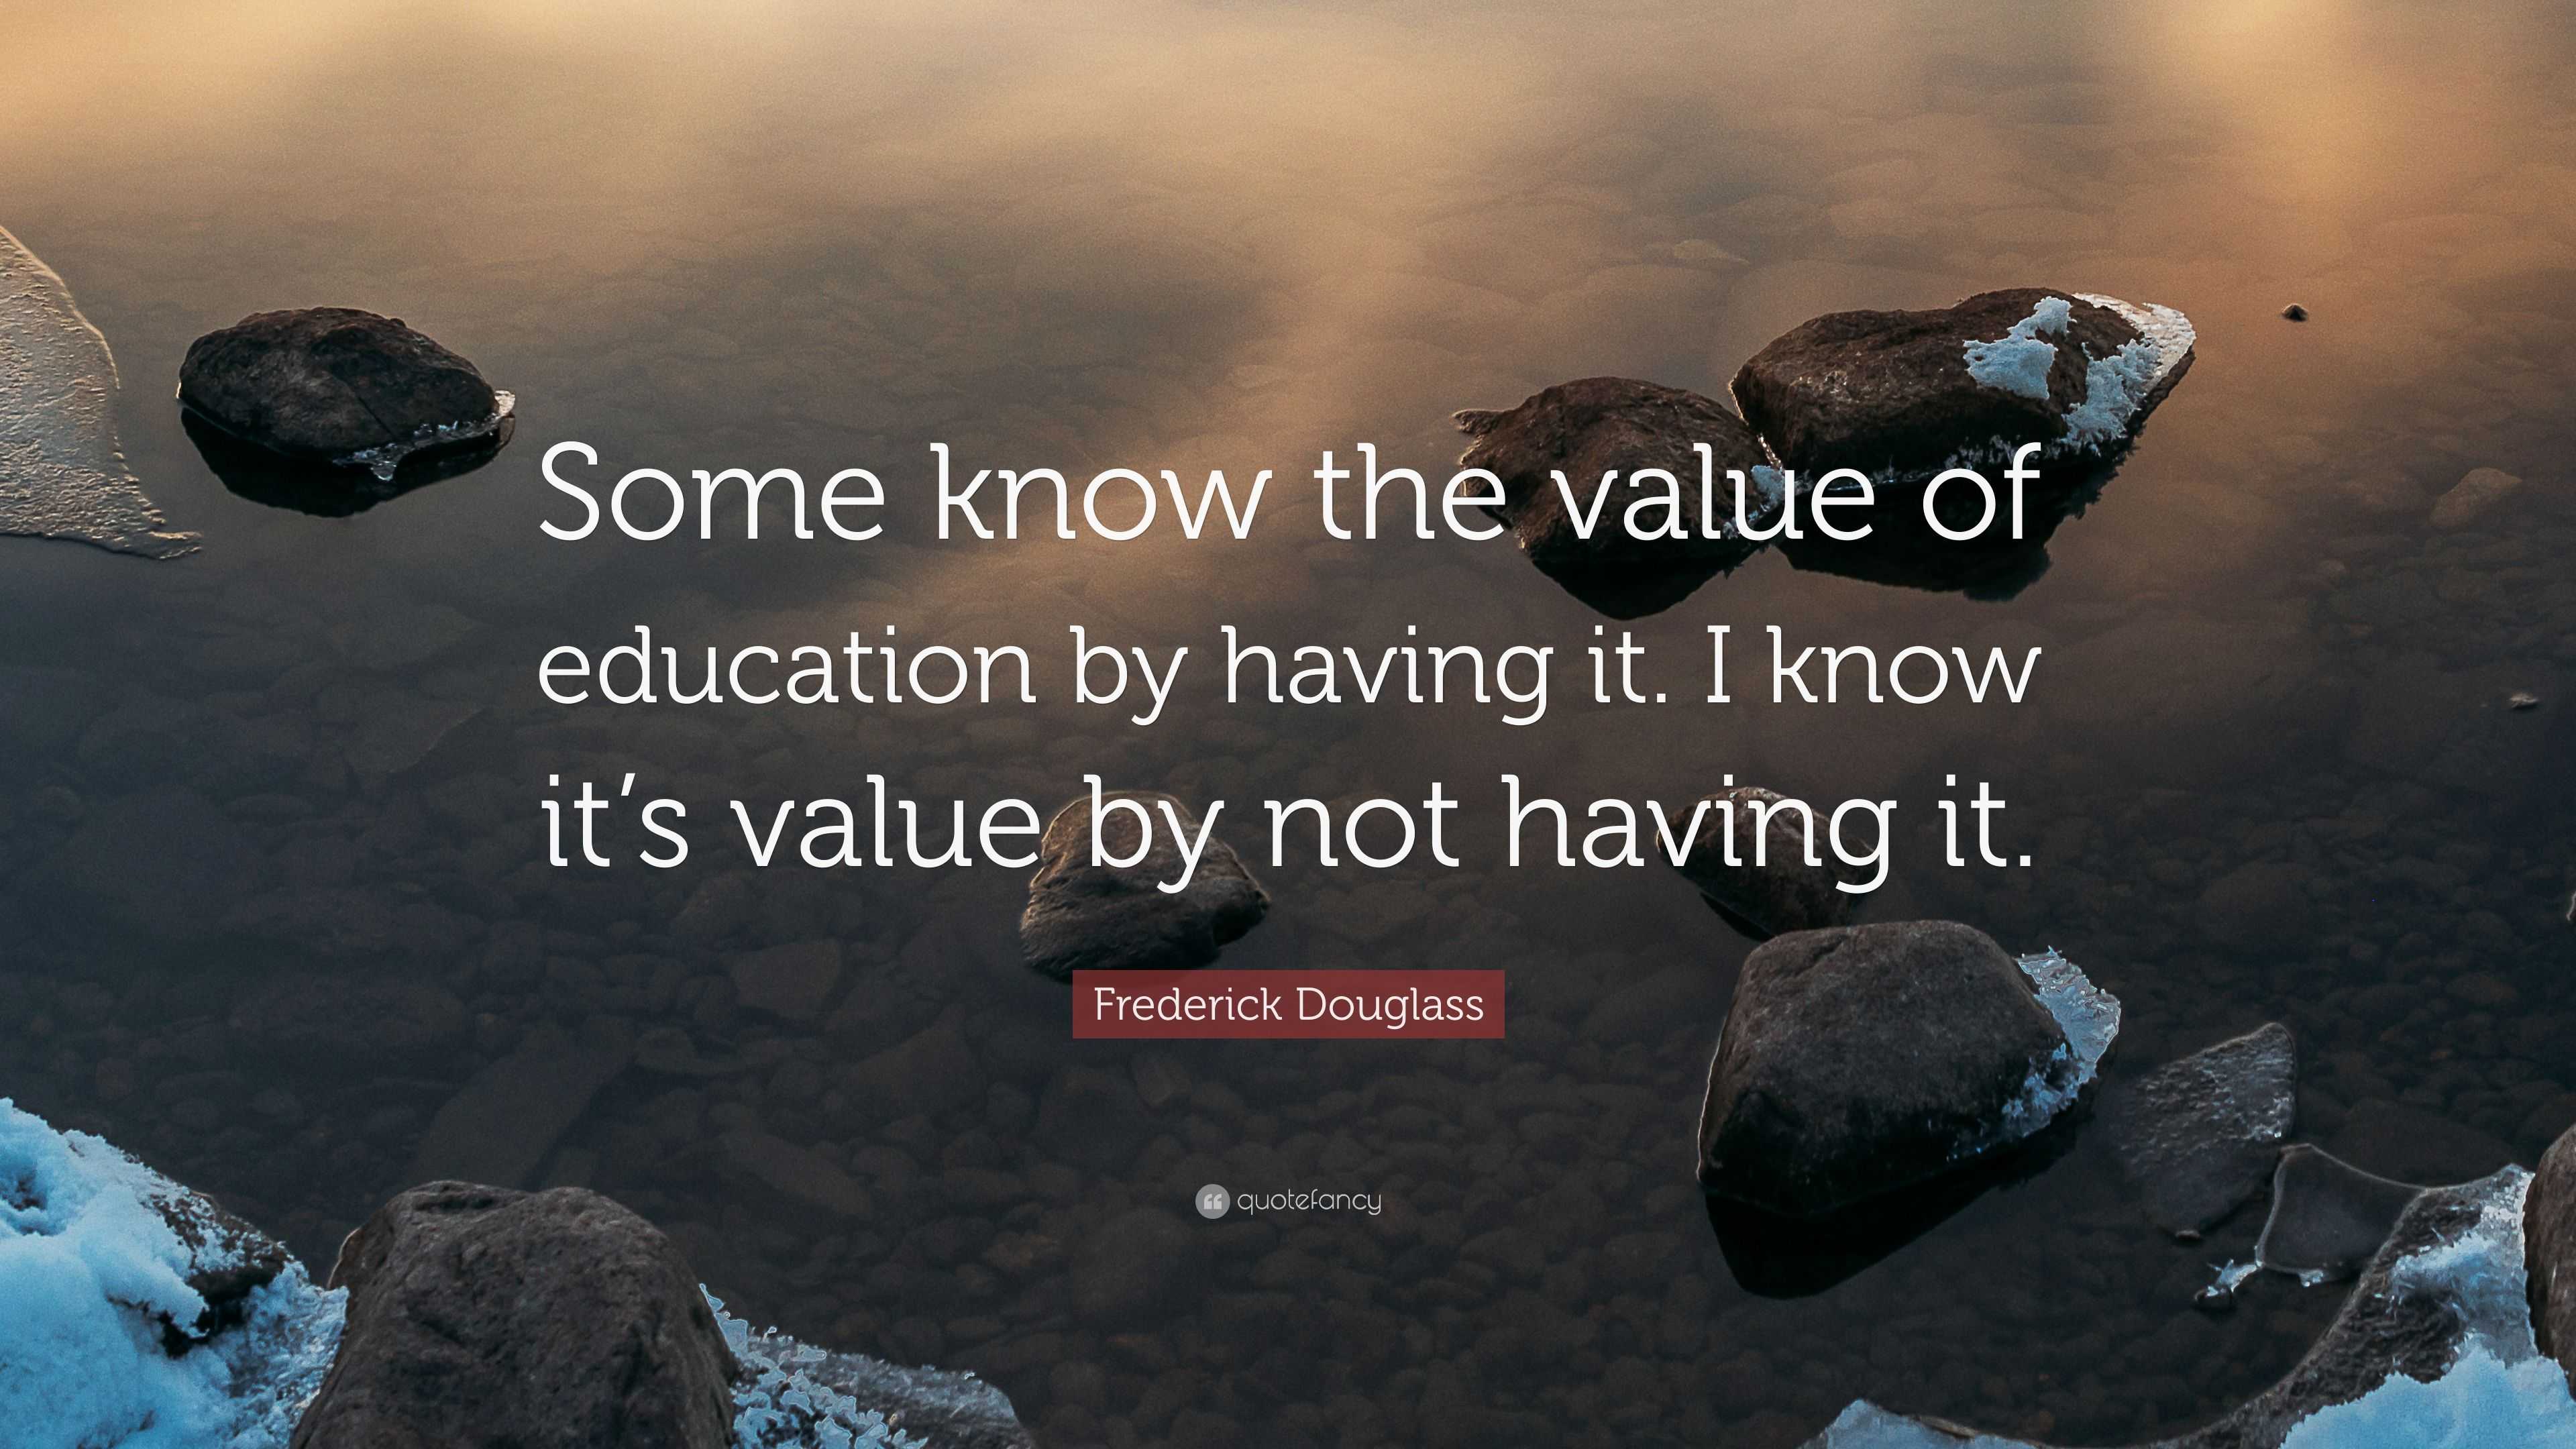 Frederick Douglass Quote “some Know The Value Of Education By Having